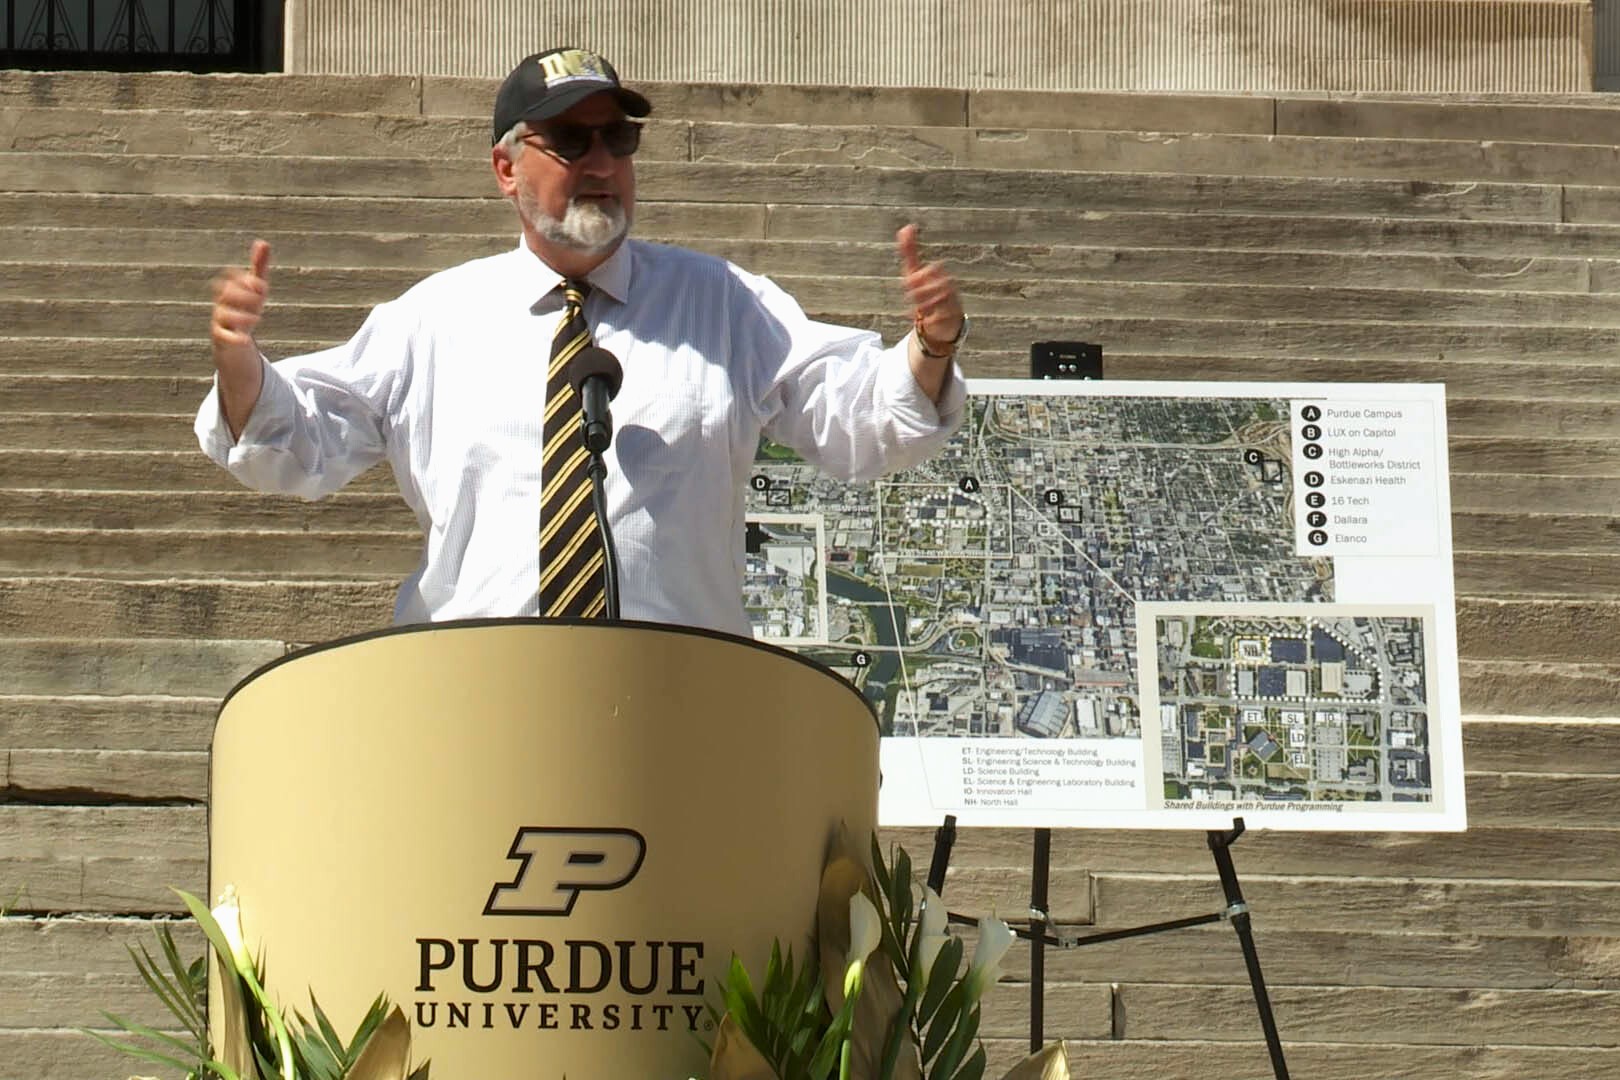 Governor Holcomb at Purdue celebration